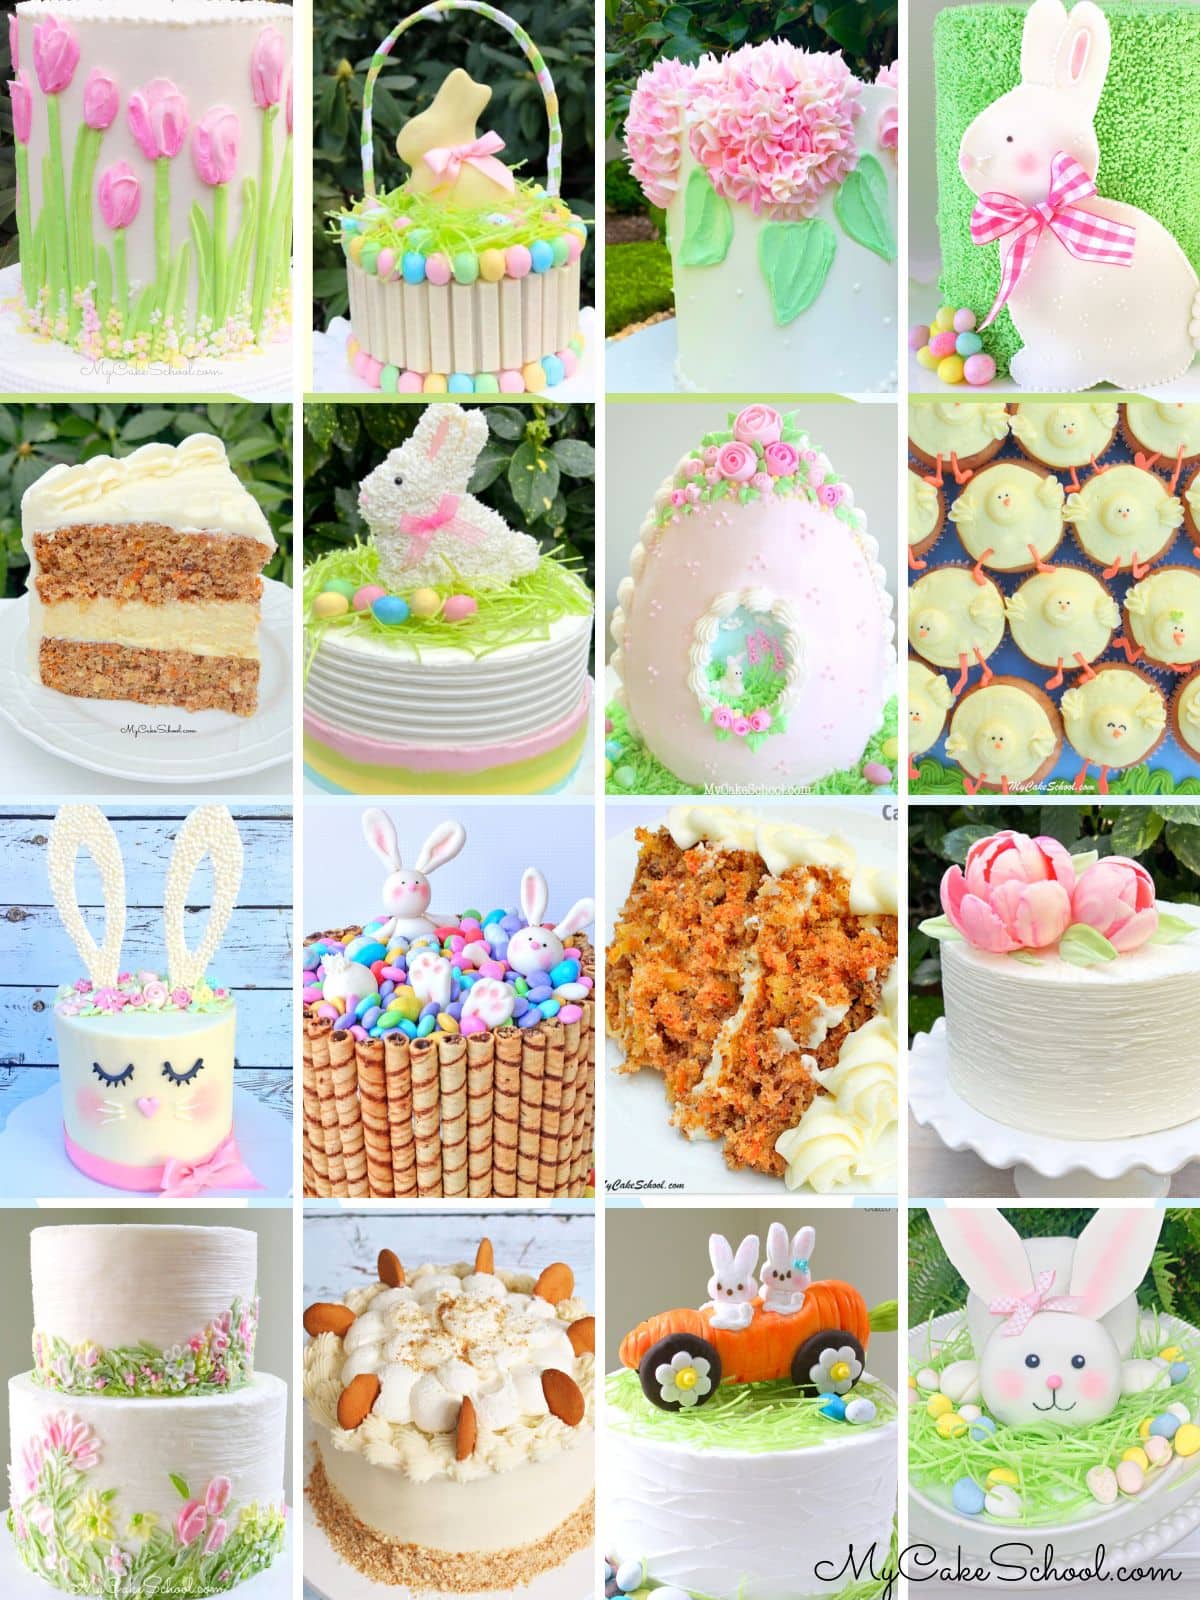 photo grid of easter cake designs.